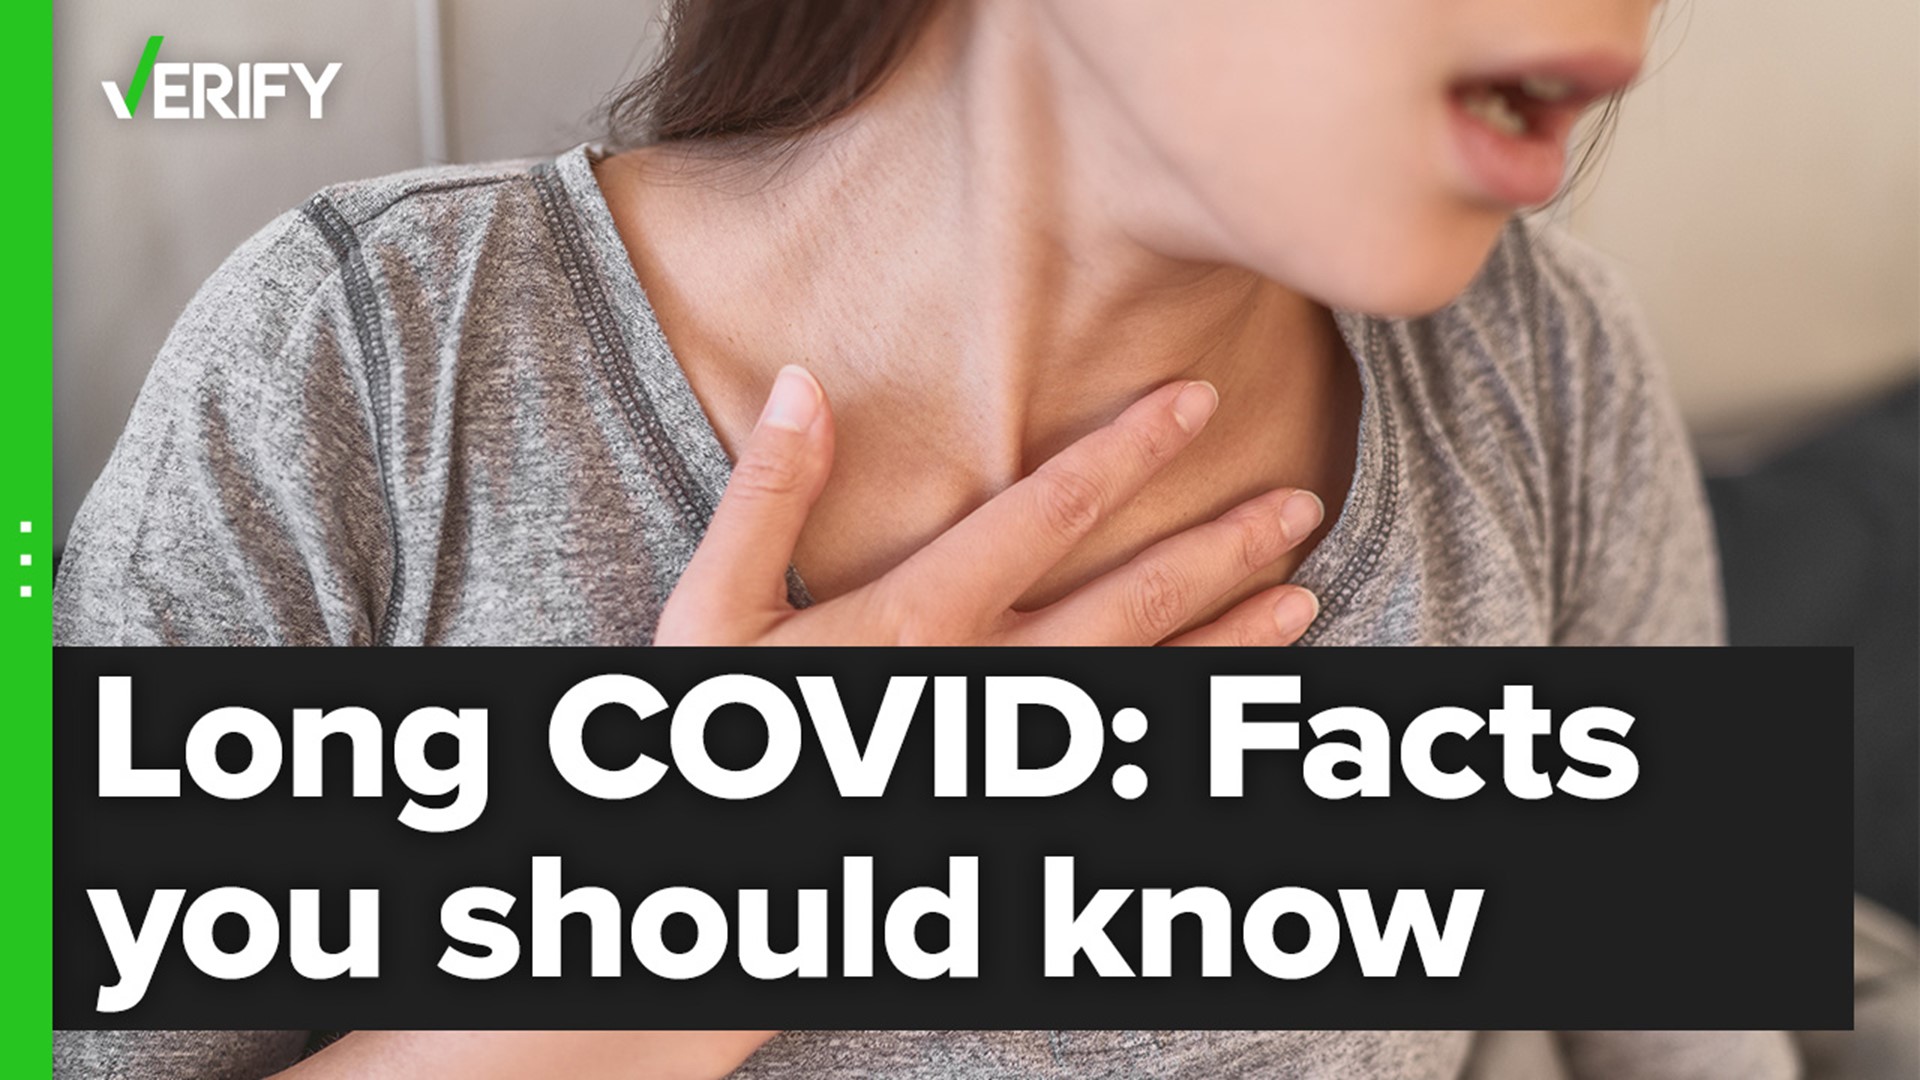 Several VERIFY readers have asked the team about long COVID. We’re breaking down the answers to some of the most common questions.